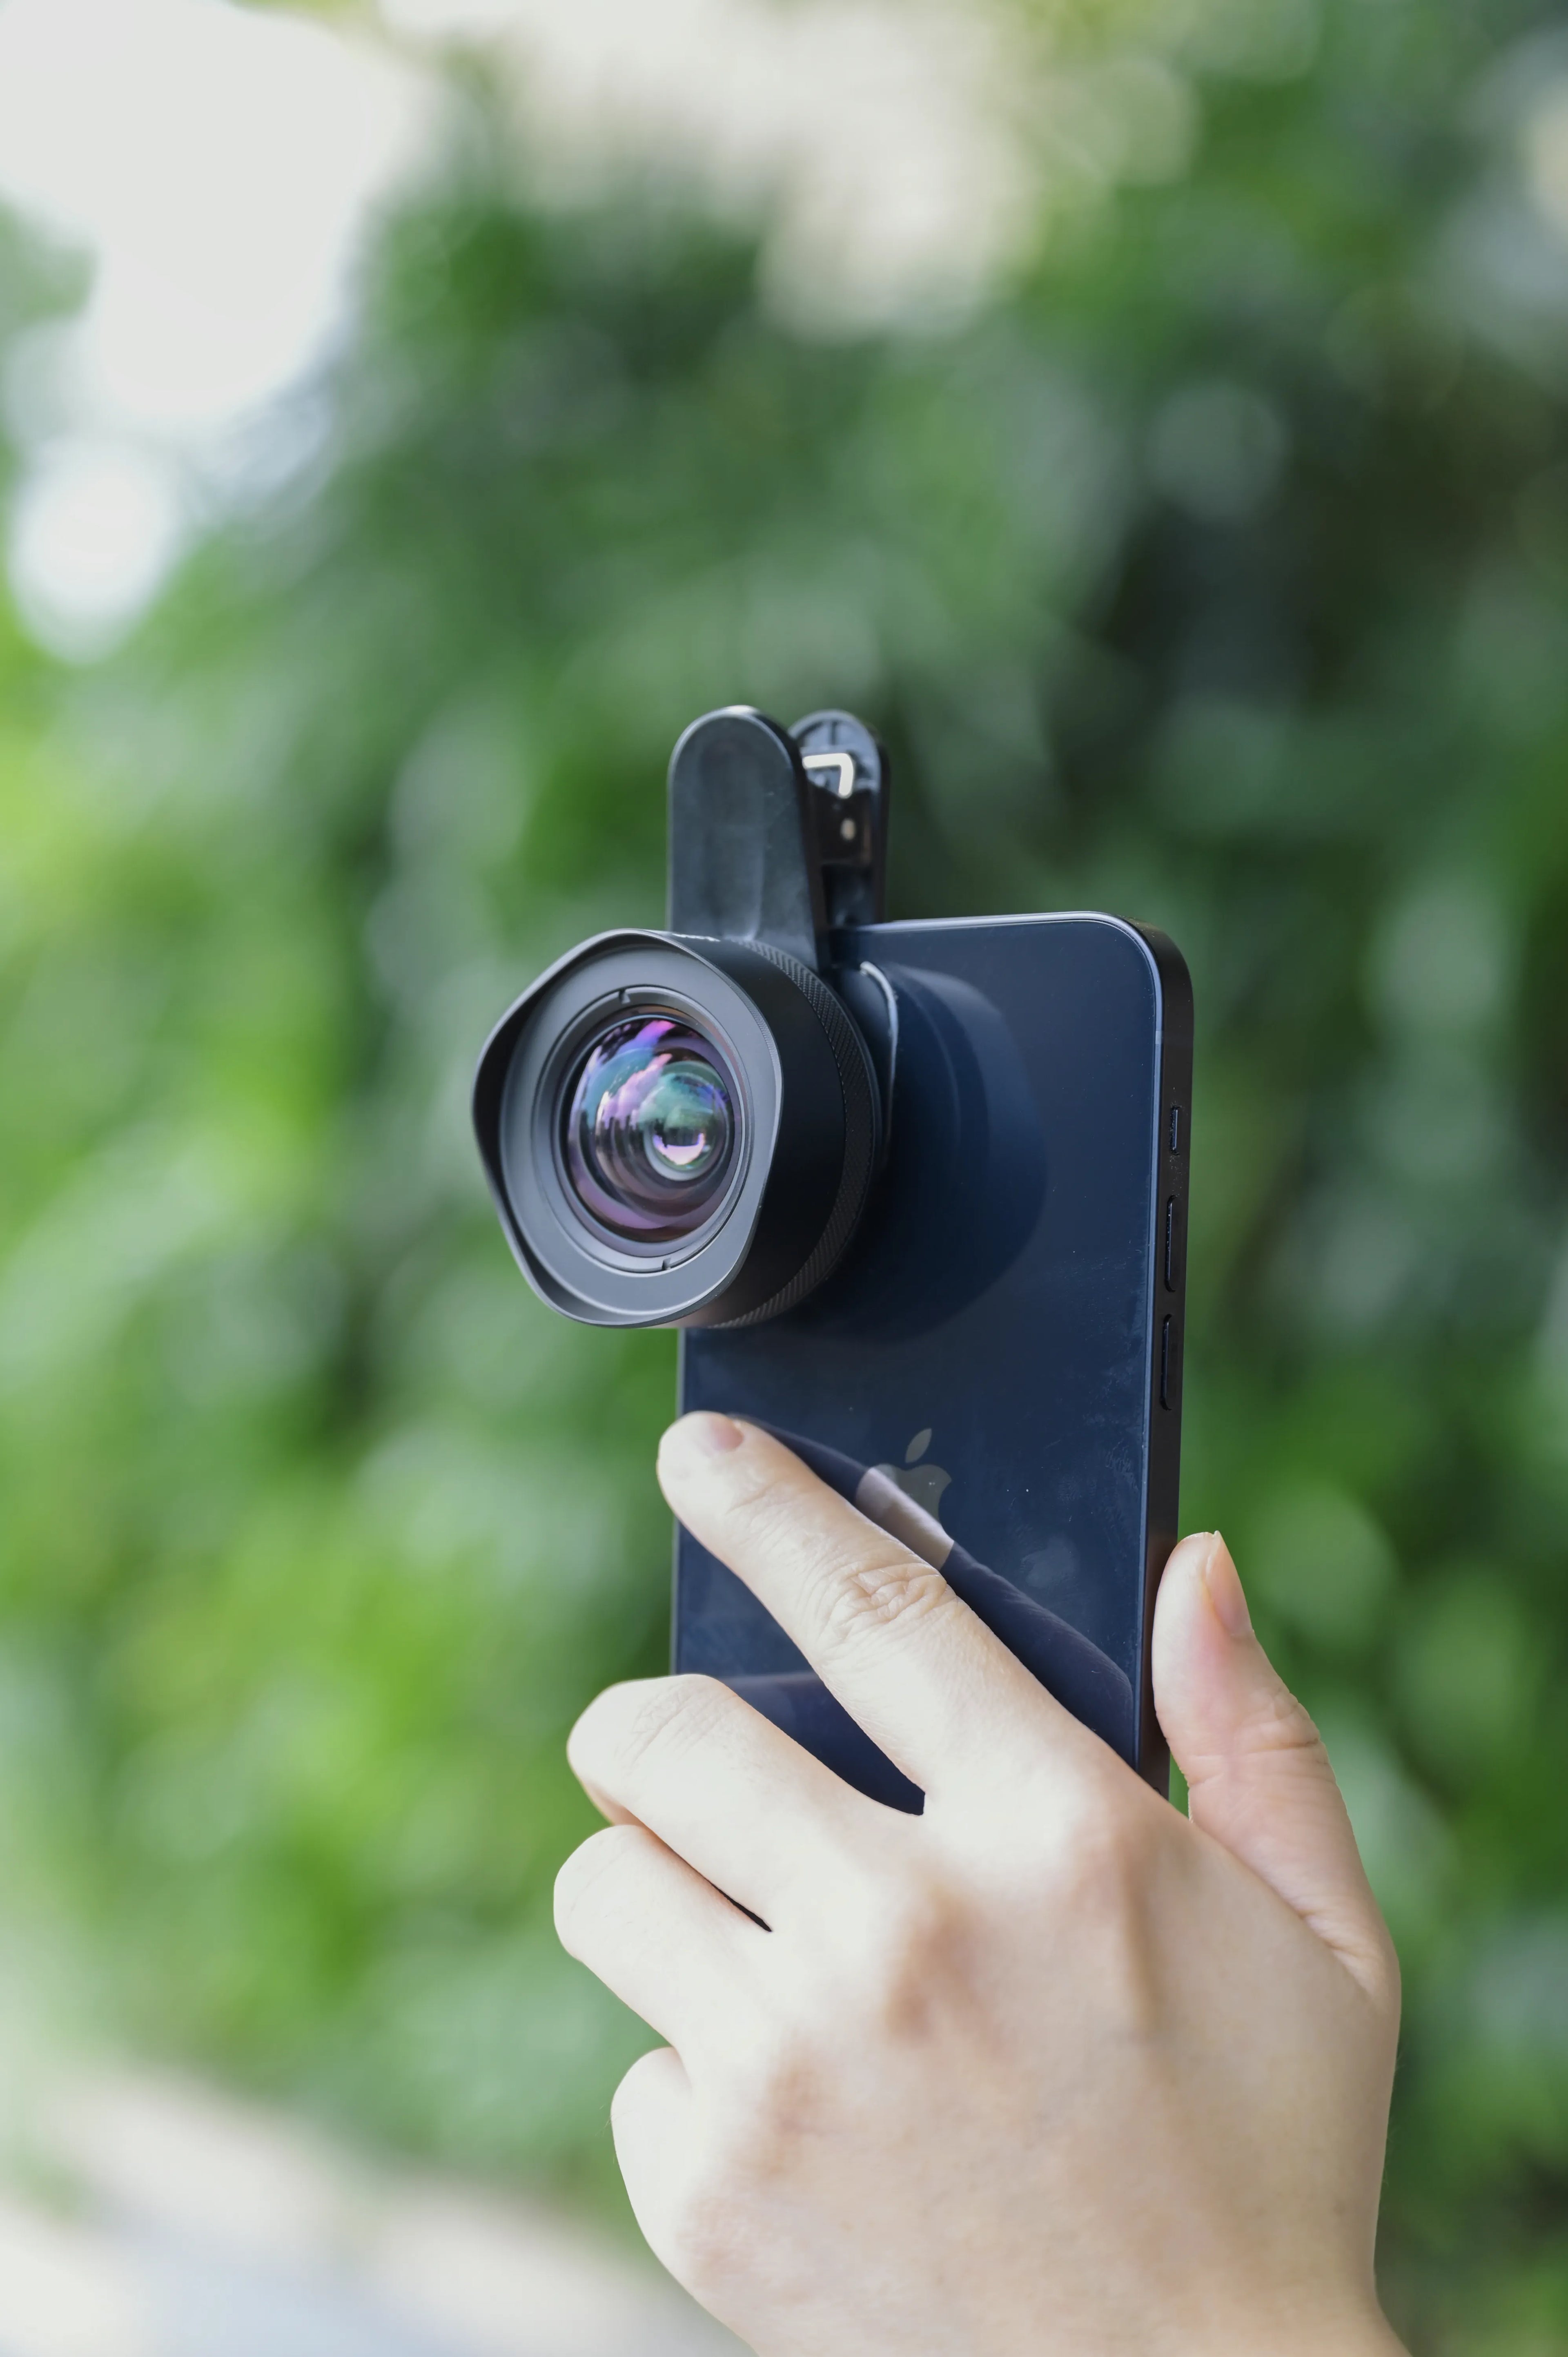 [New] Kase 110° Super Wide Angle Lens For Smartphone Best Lenses Wide Angle - APEXEL INDIA - Mobile Lens - Mobile Camera Lens - Cellphone Accessories - Phone Lens - Smartphone Lens